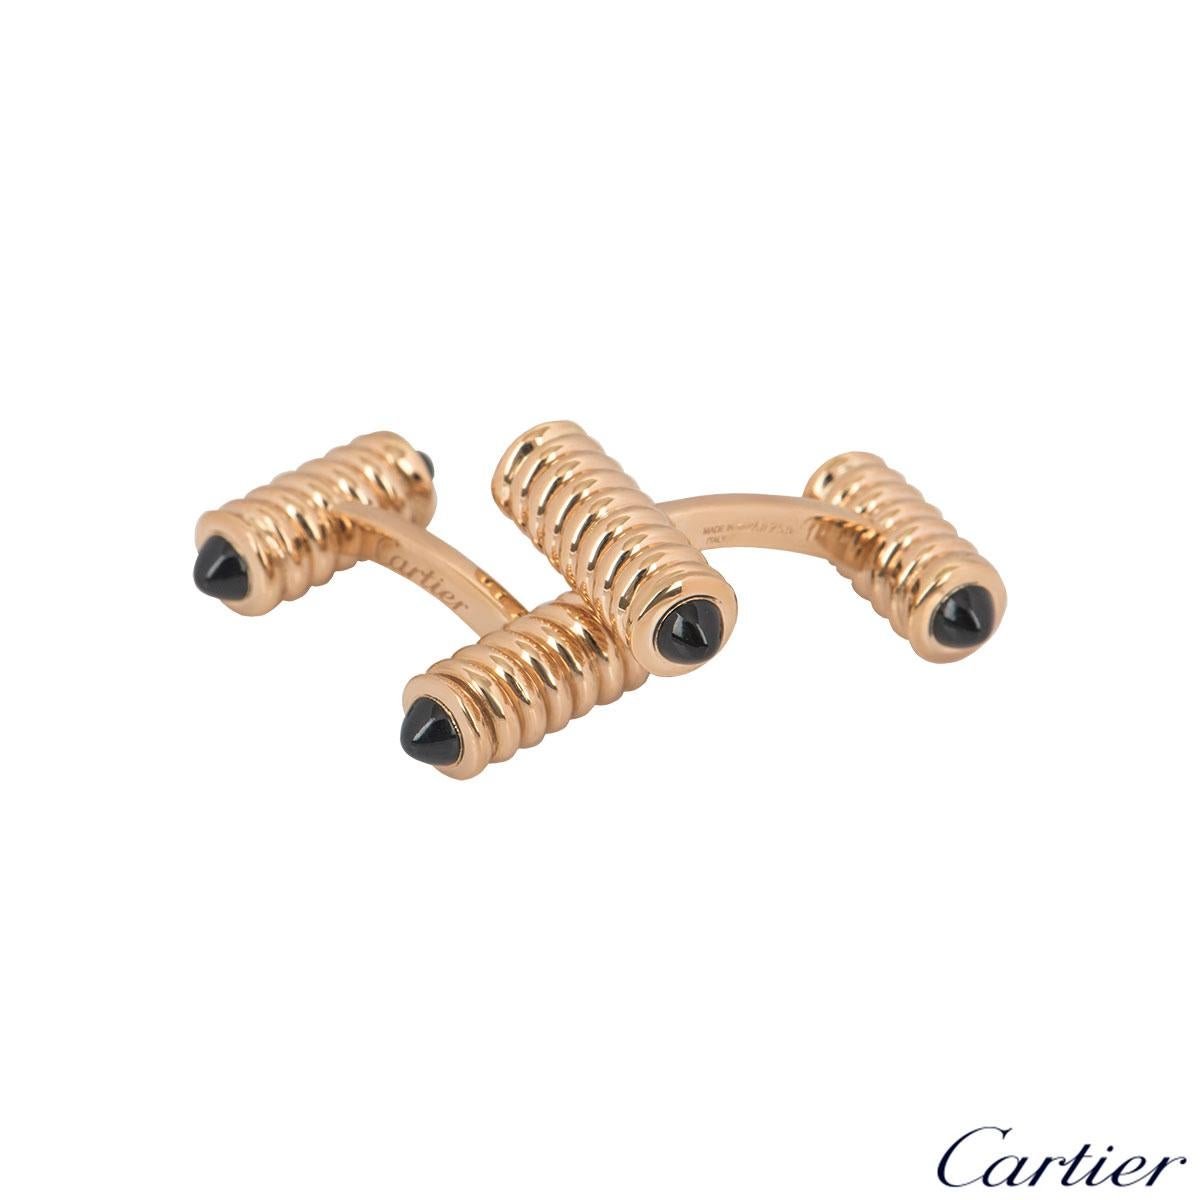 An alluring pair of 18k rose gold and onyx cufflinks by Cartier. The cufflinks feature two ribbed rose gold bars in different sizes with onyx beads on both ends. The cufflinks are encased together by a bar fitting with a length of 2.20cm, width of